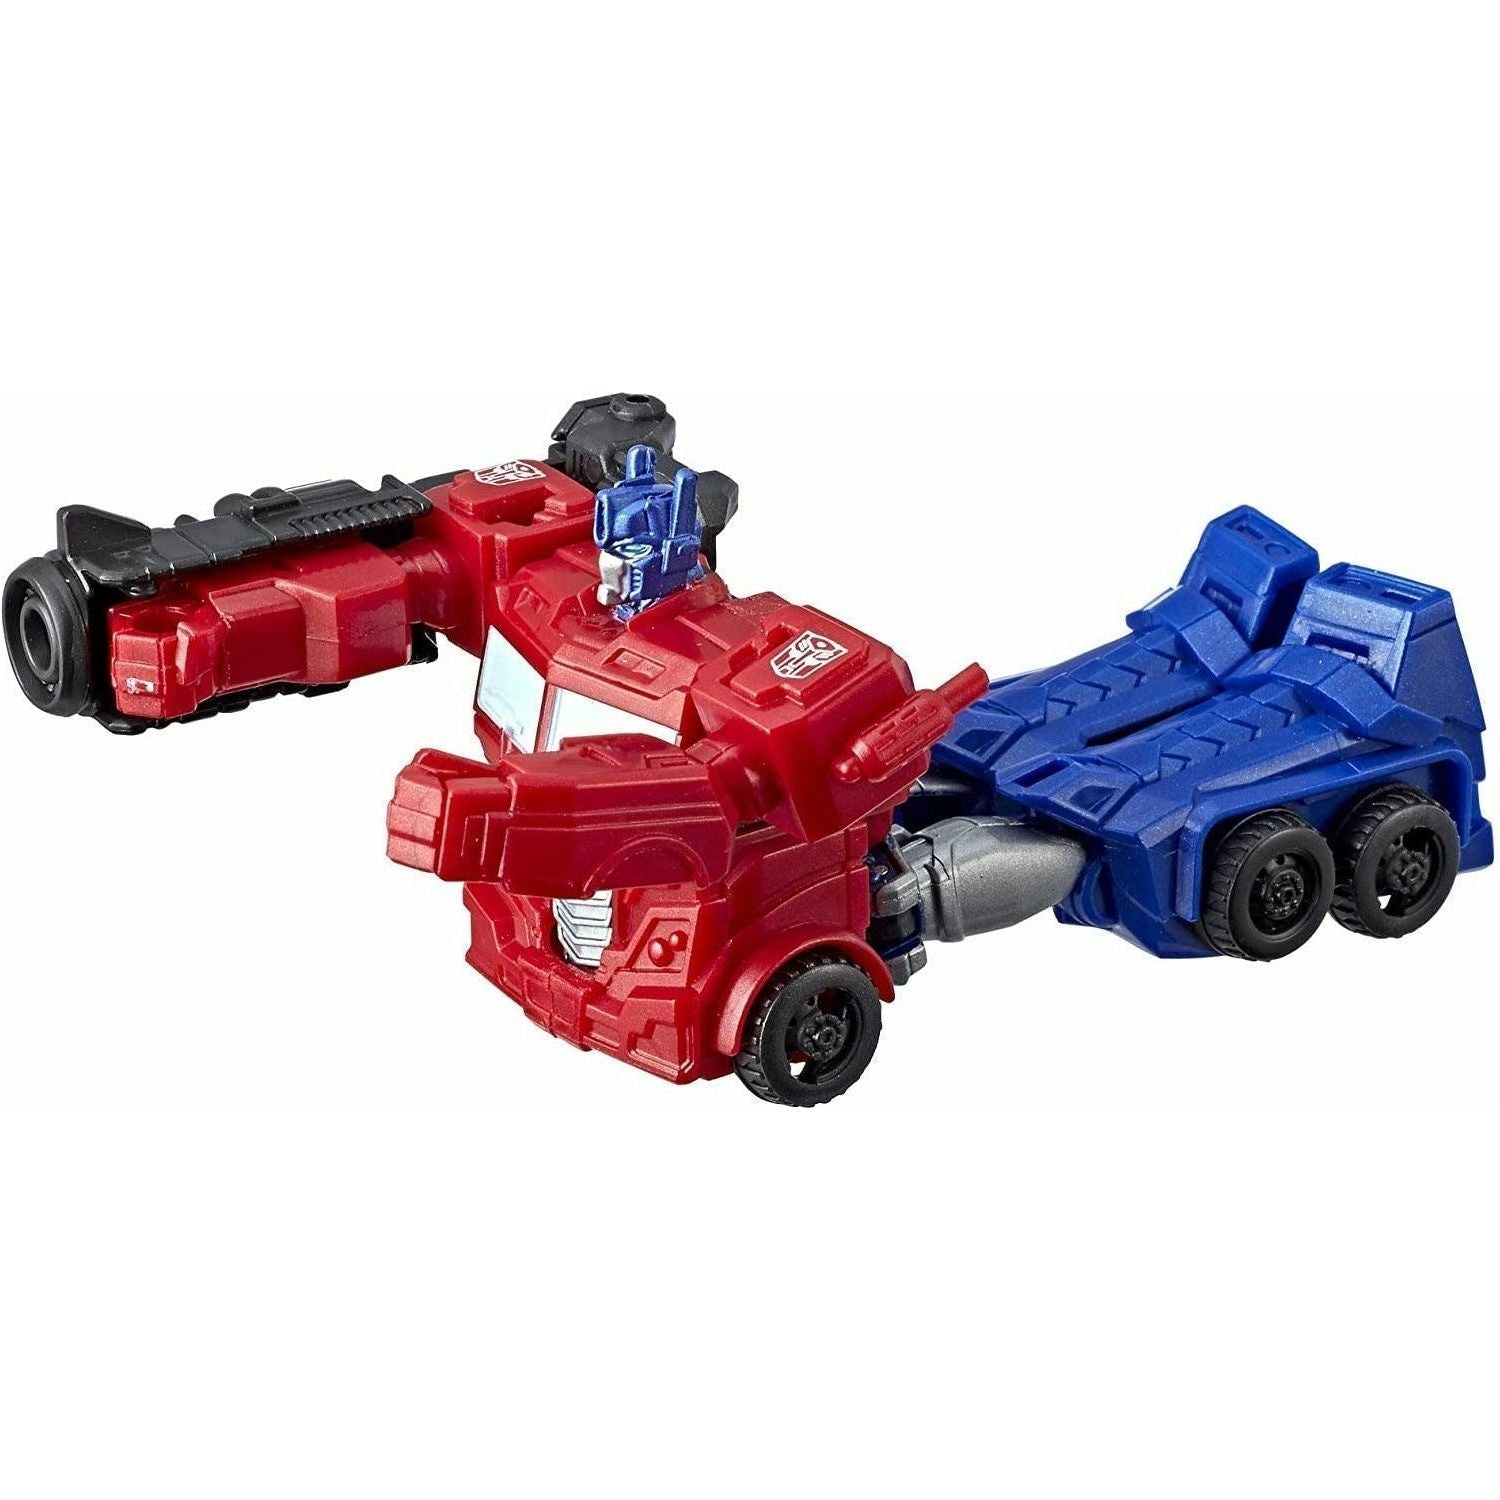 Transformers Cyberverse Scout Class Optimus Prime - BumbleToys - 6+ Years, Action Figures, Boys, Figures, OXE, Pre-Order, Transformers